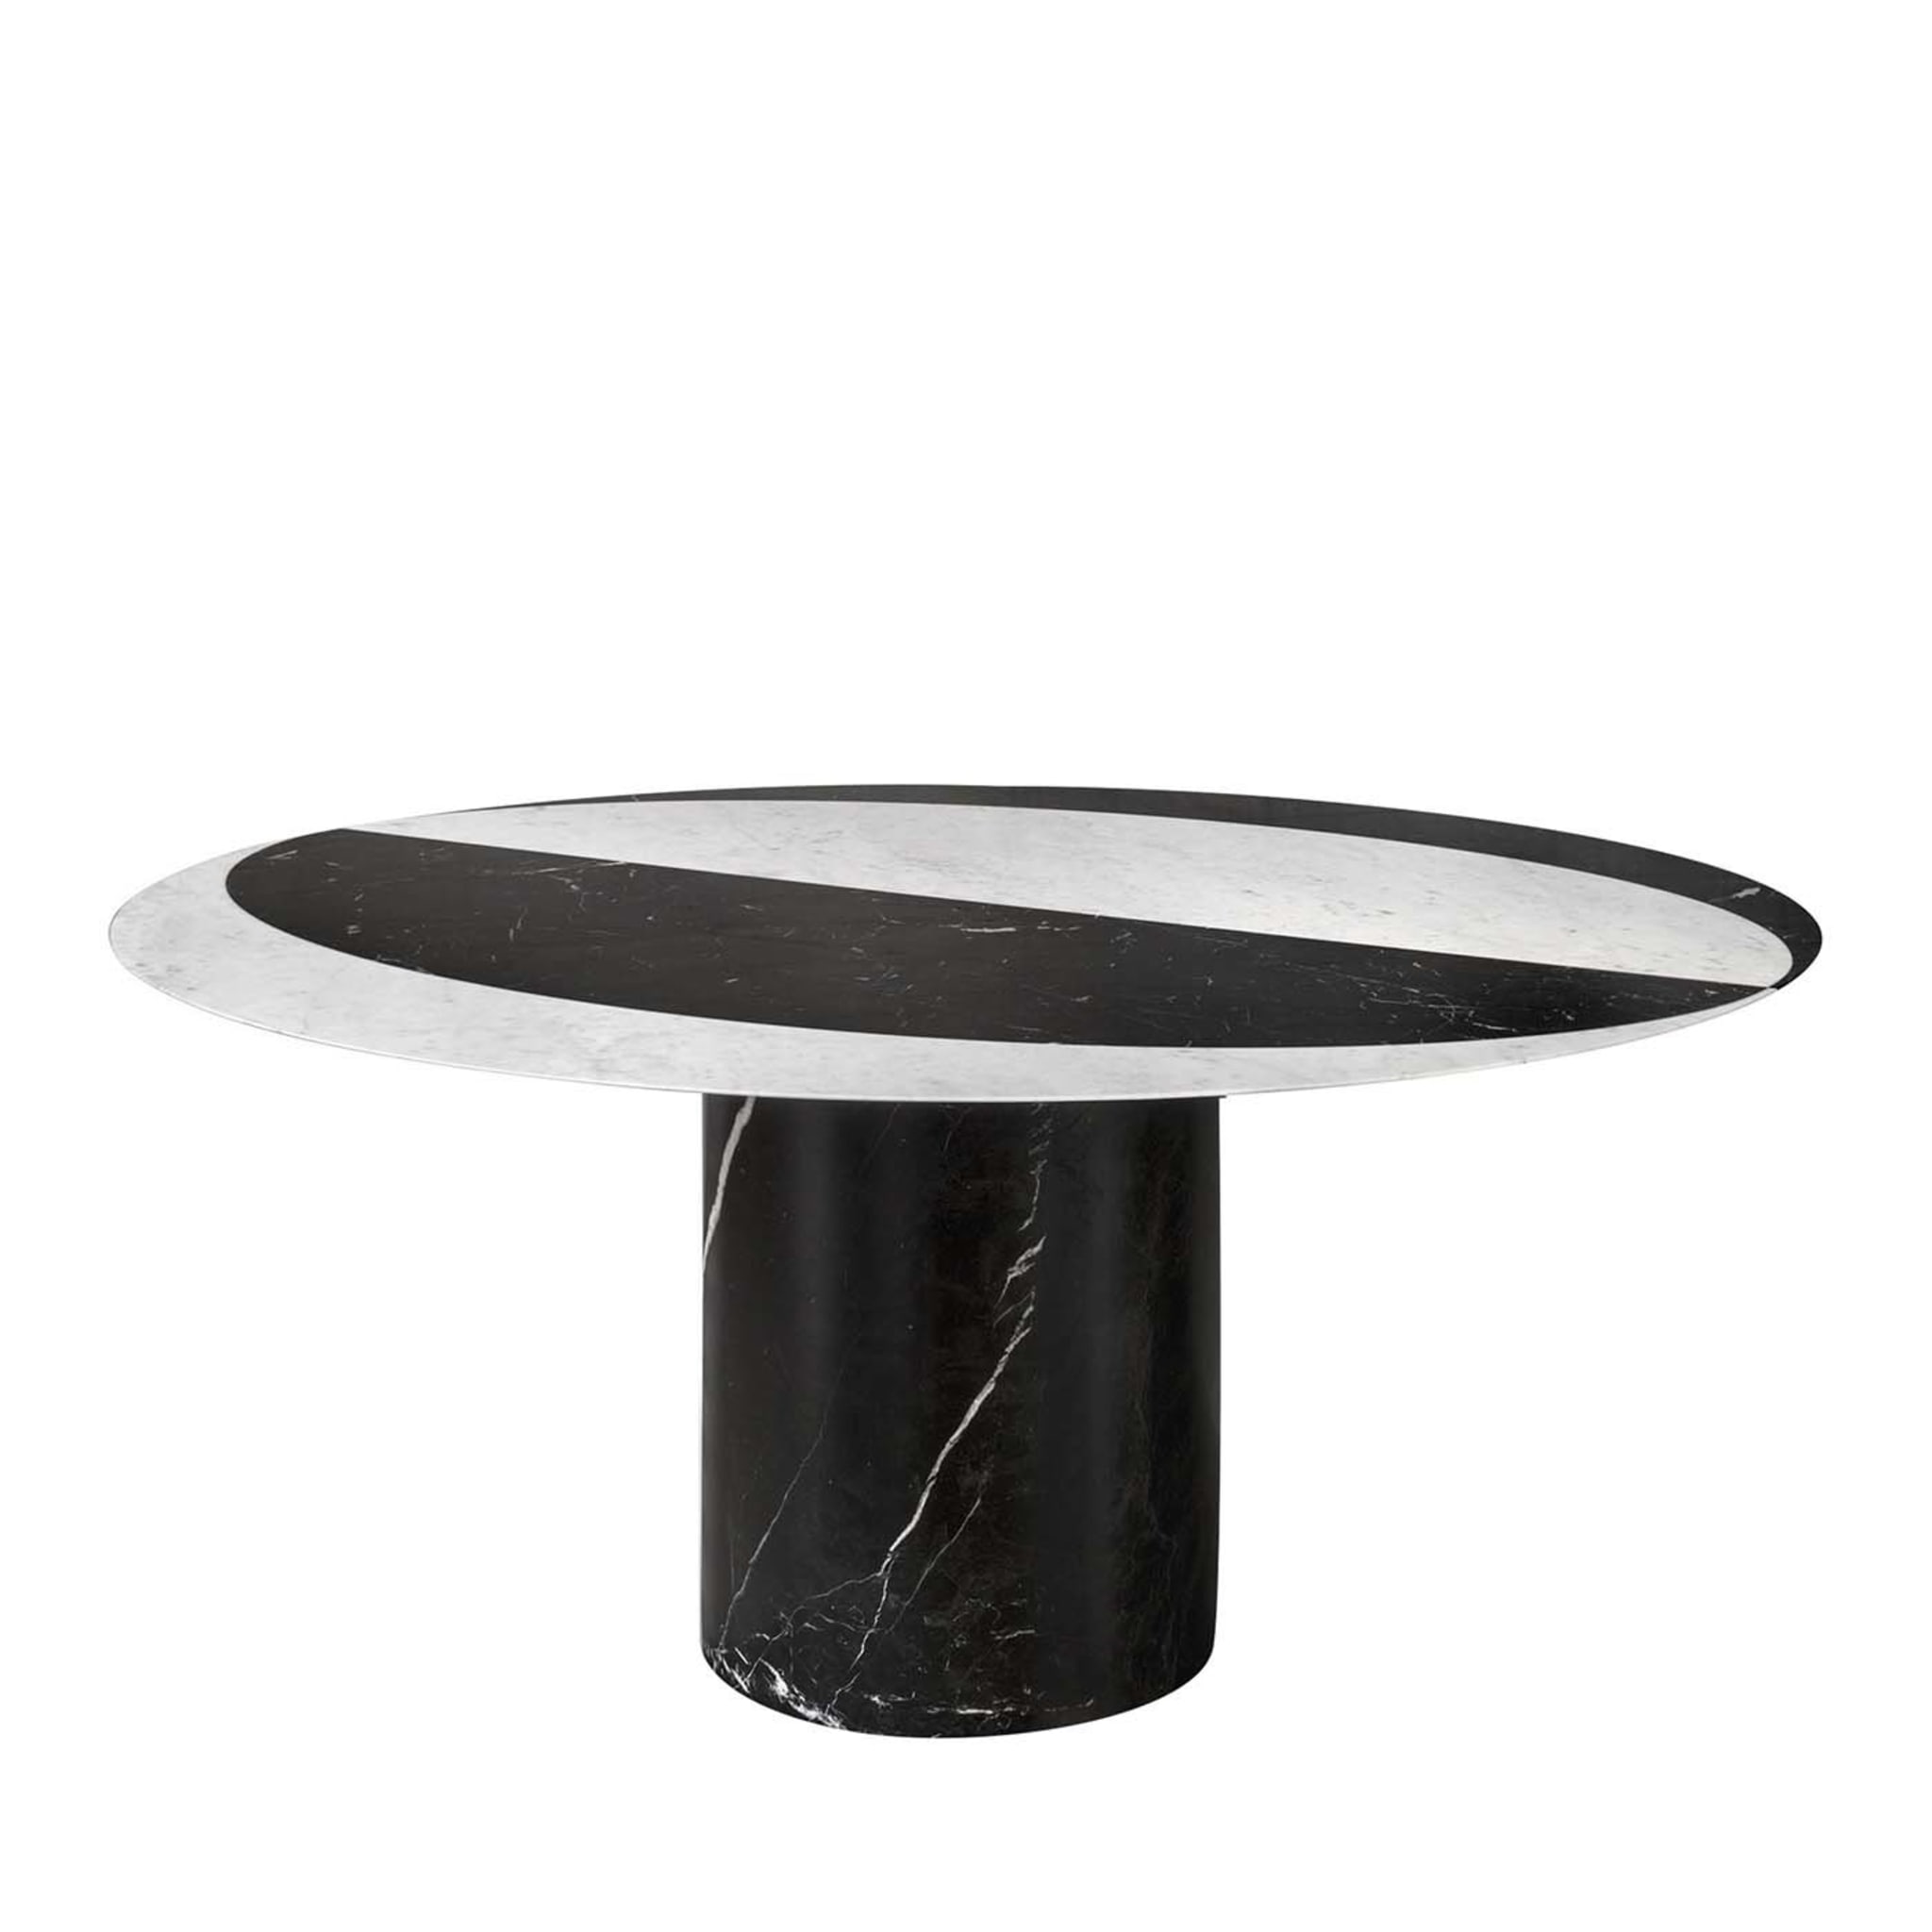 Proiezioni Round Black and White Marble Dining Table #2 by Elisa Ossino - Main view